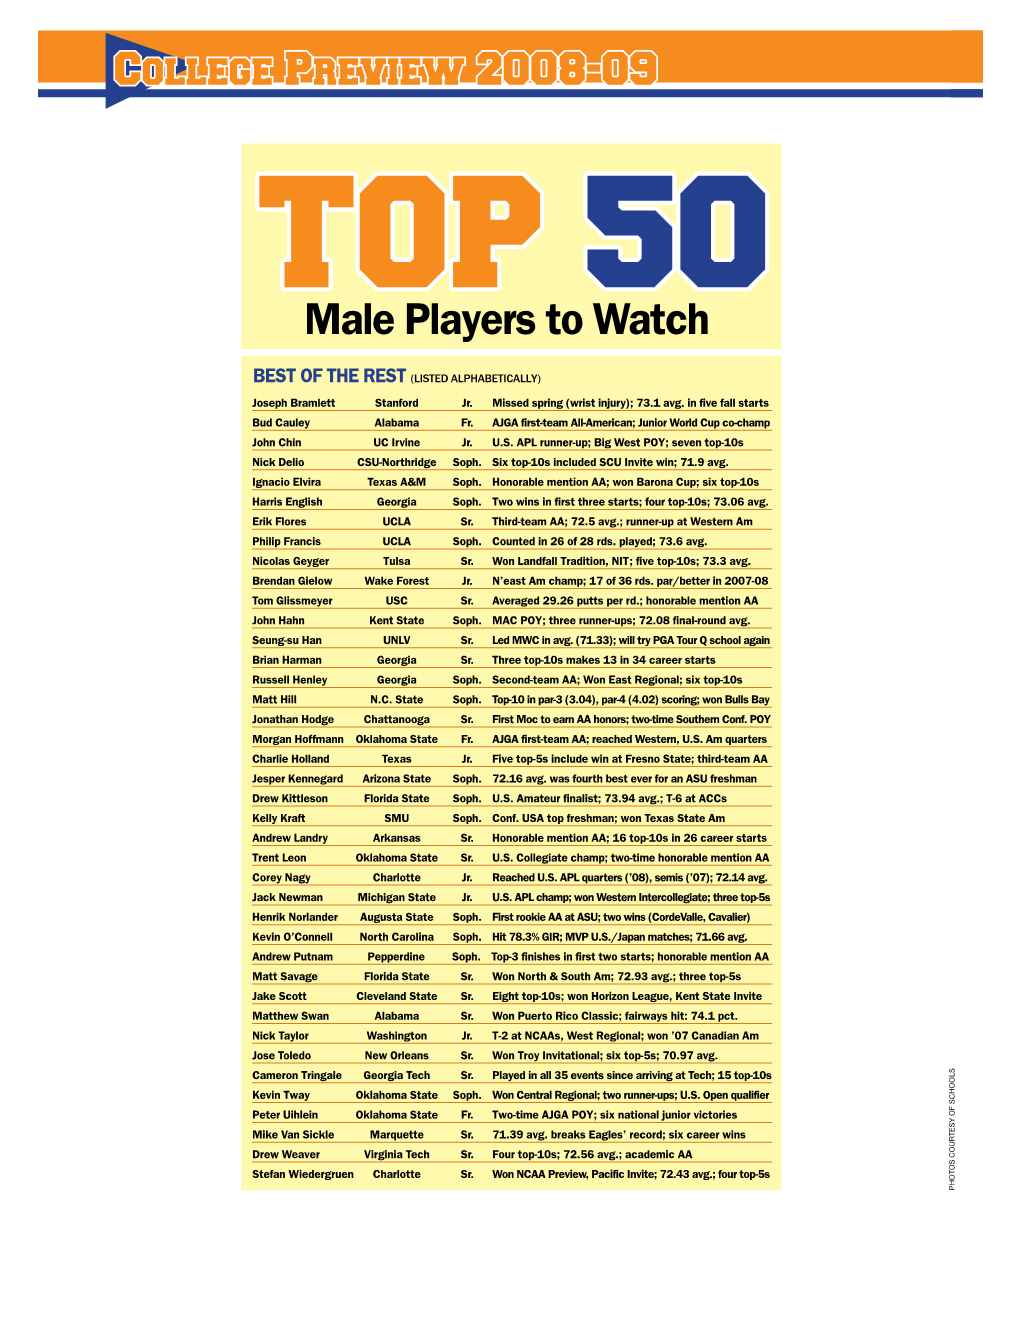 Male Players to Watch